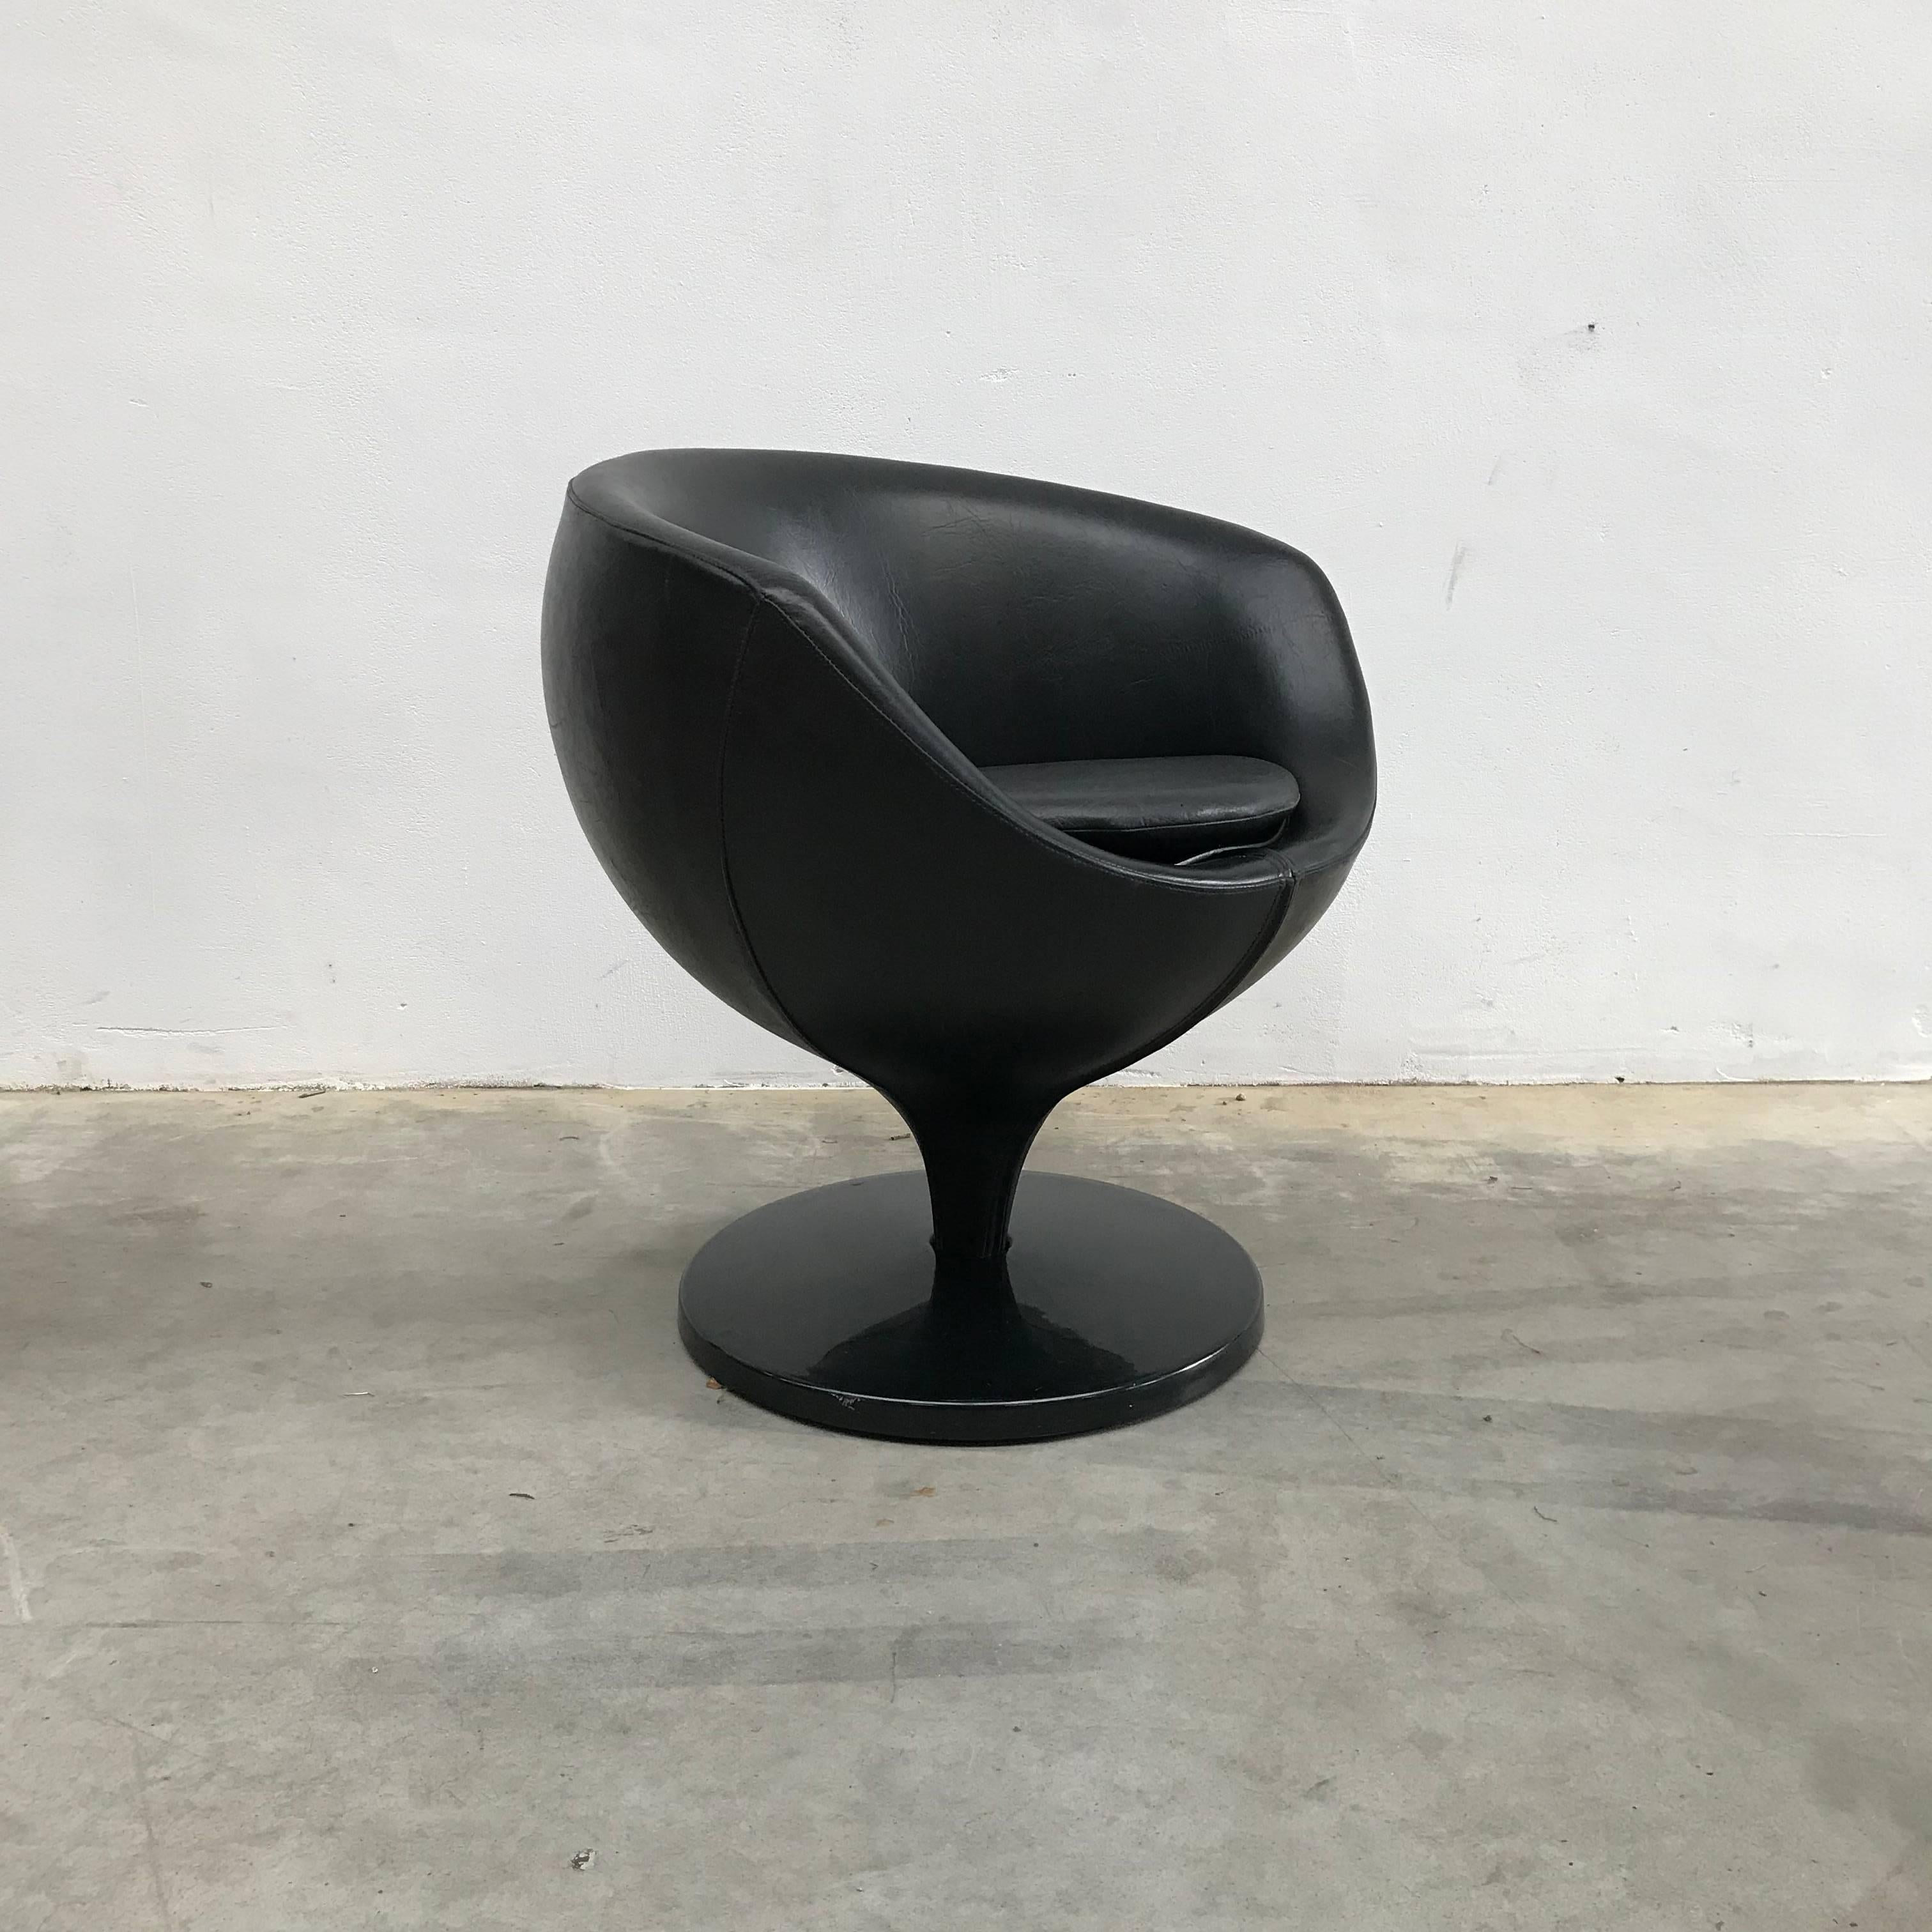 Vintage clubchair/ lounge chair designed by Pierre Gauriche for his planetary series for Meurop, Belgium, 1967.
The chair swivels and is covered in the original black skai (faux leather). Superb original condition (comes from first owner!). The